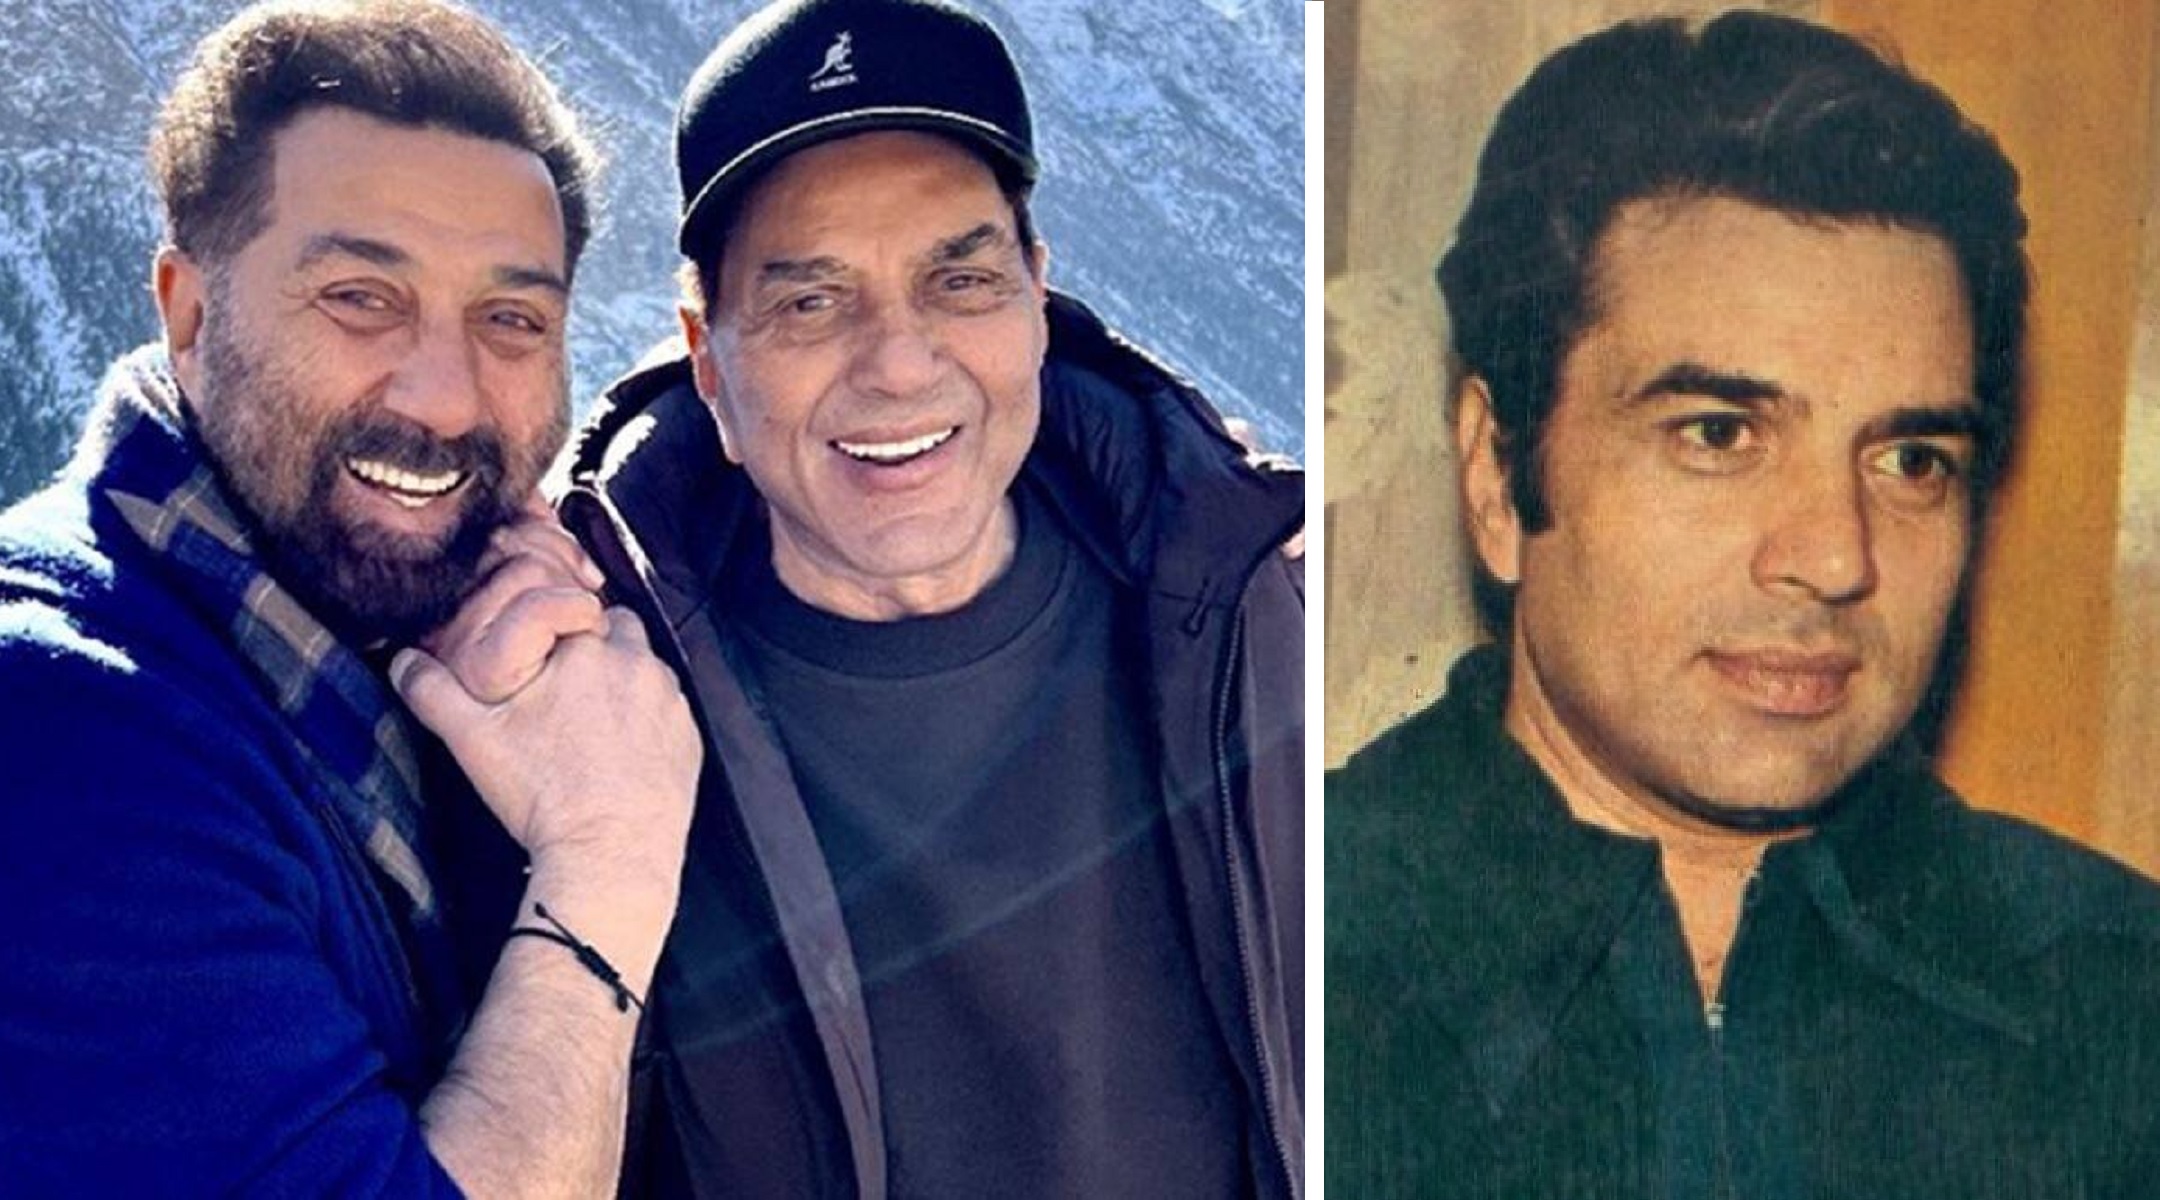 Sunny Deol calls father Dharmendra the ‘only actor to succeed in all genres’, says ‘he has done it all’